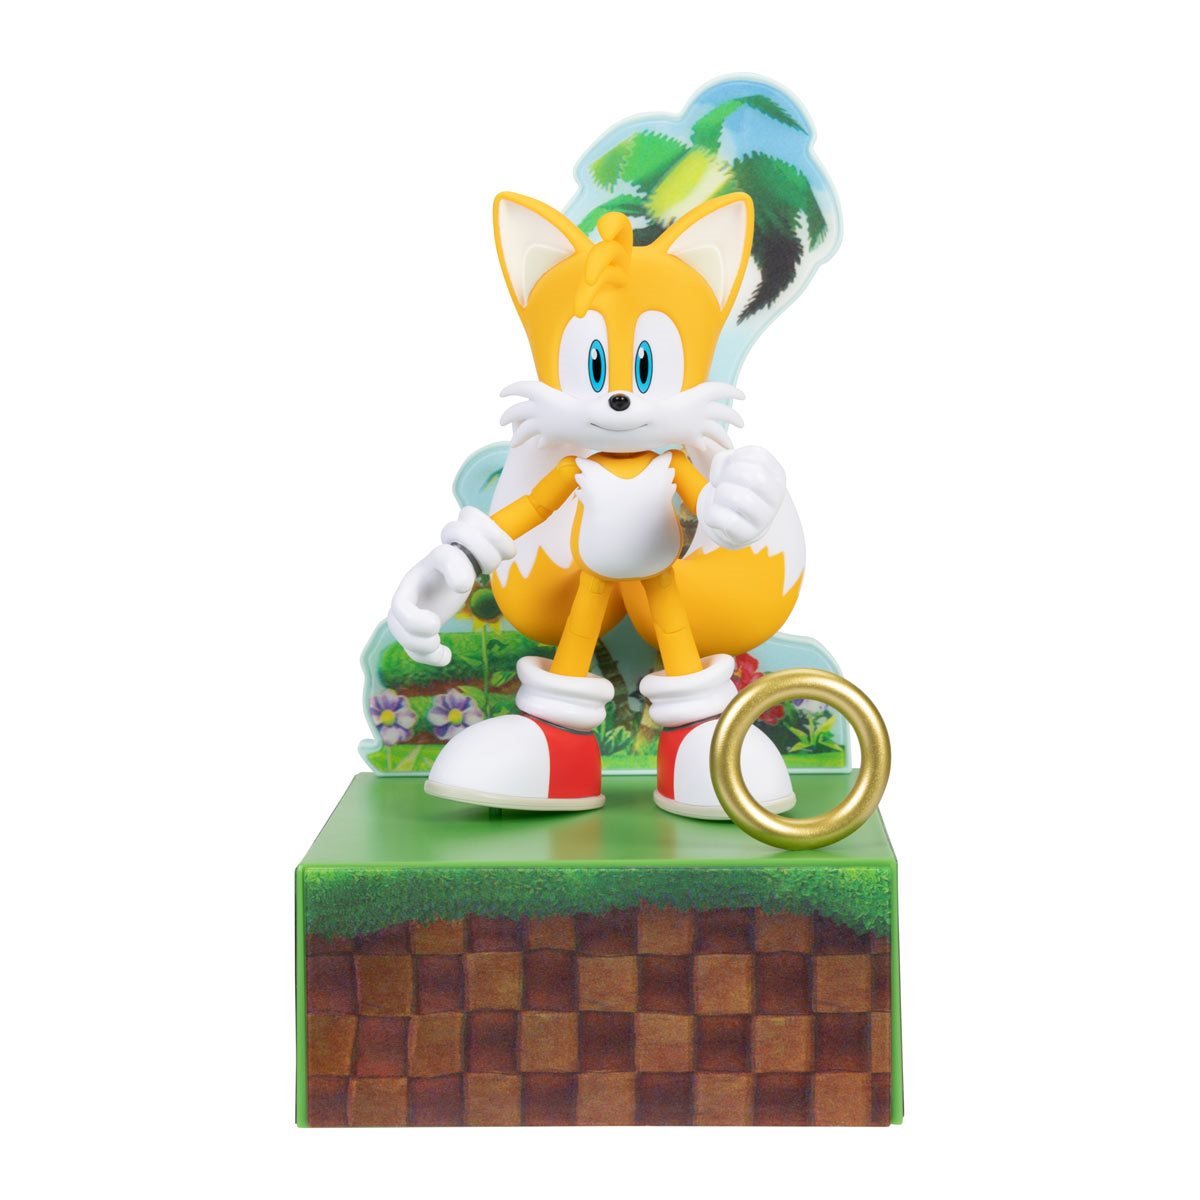 Flying Tails: Classic Sonic The Hedgehog Collectible Pin